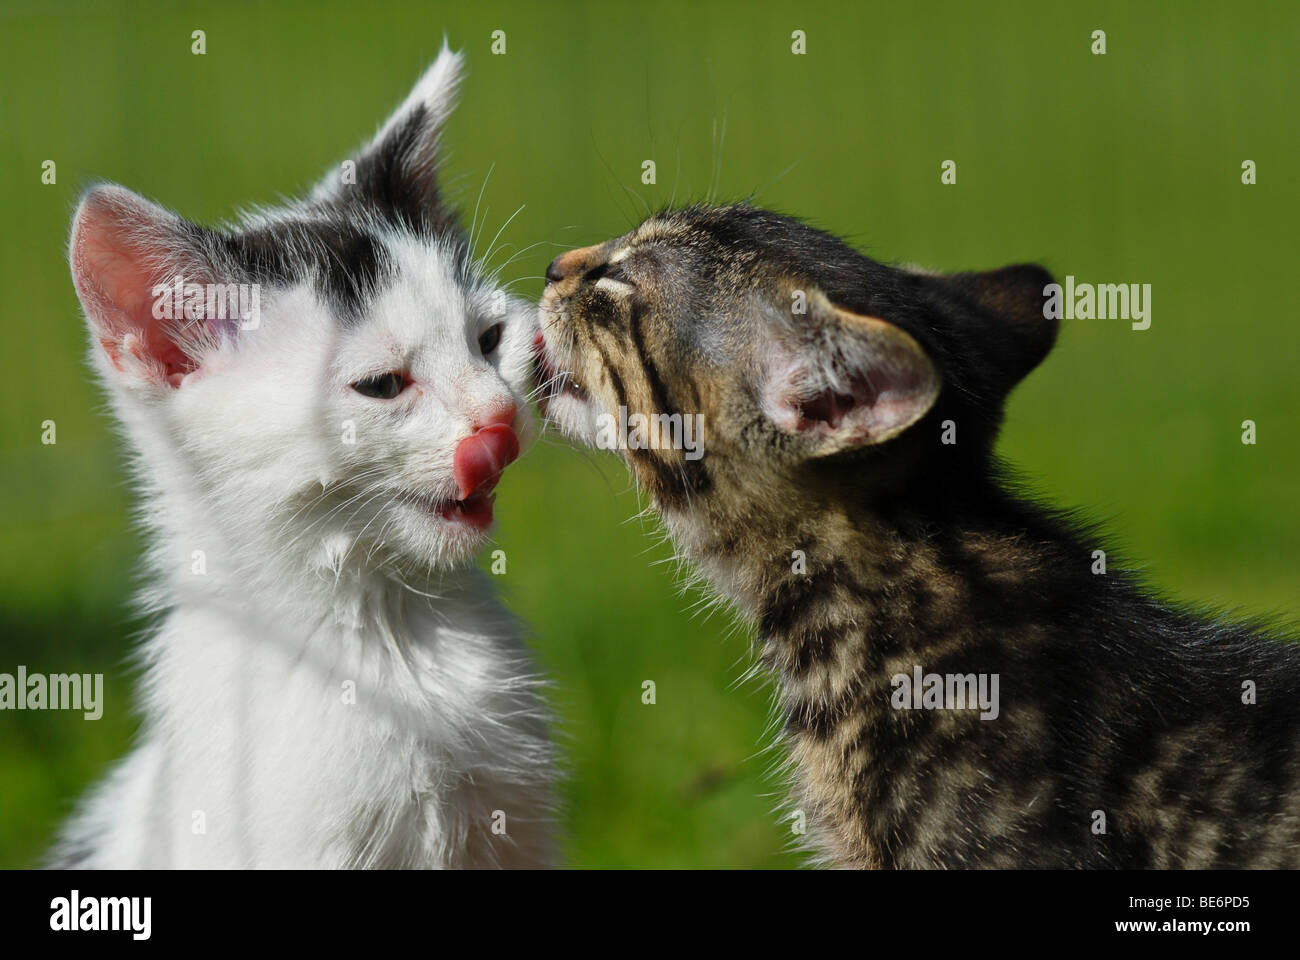 Domestic cats, kittens licking each other's face Stock Photo